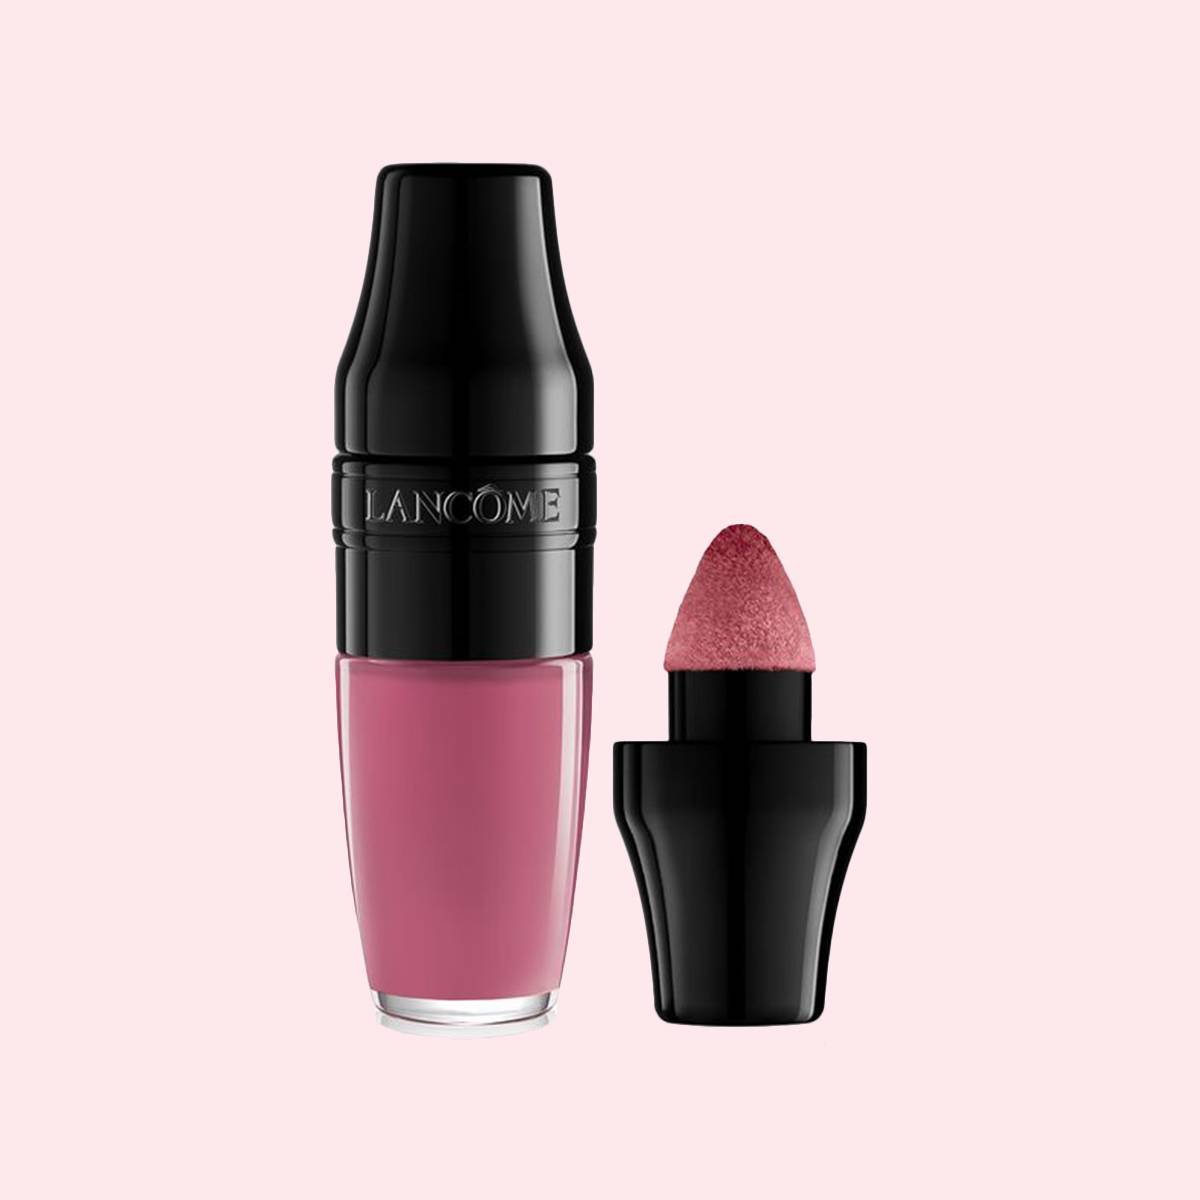 This Matte Lipstick is Going to be Your New Obsession